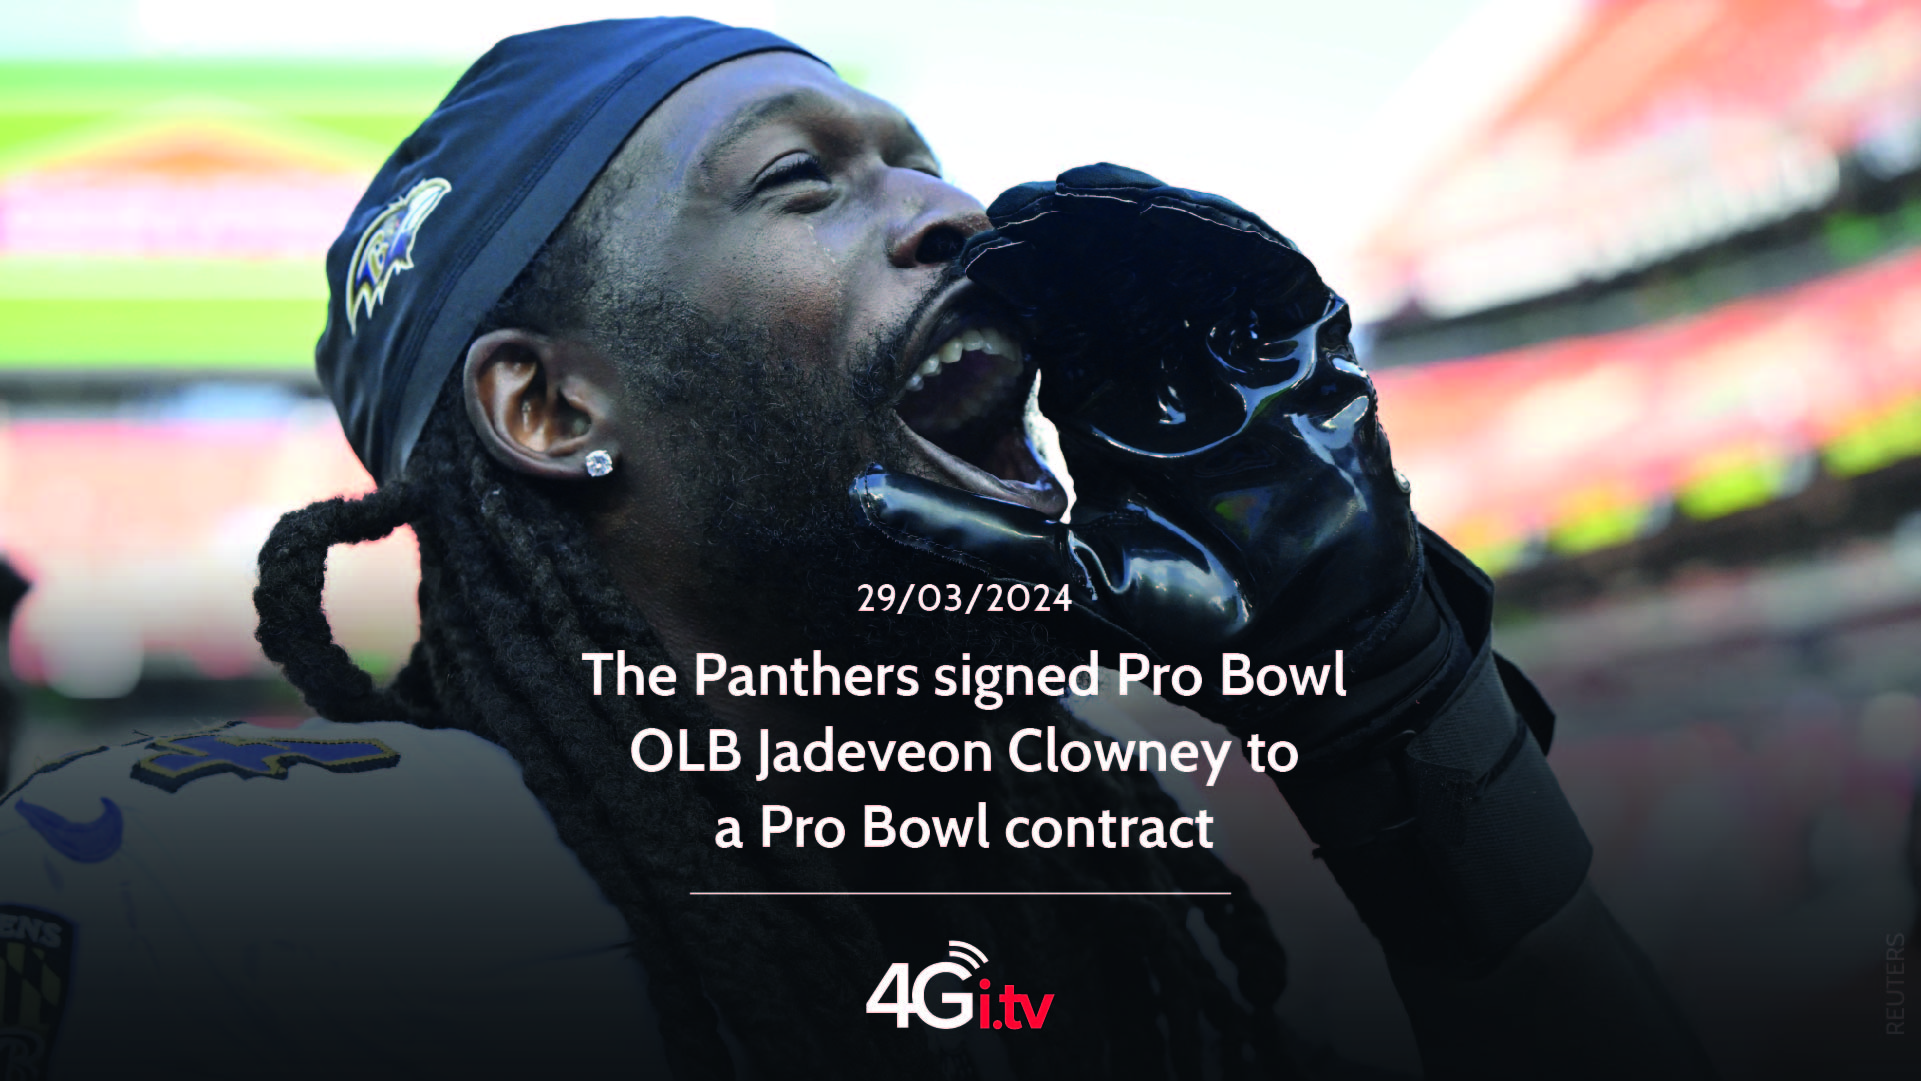 Подробнее о статье The Panthers signed Pro Bowl OLB Jadeveon Clowney to a Pro Bowl contract